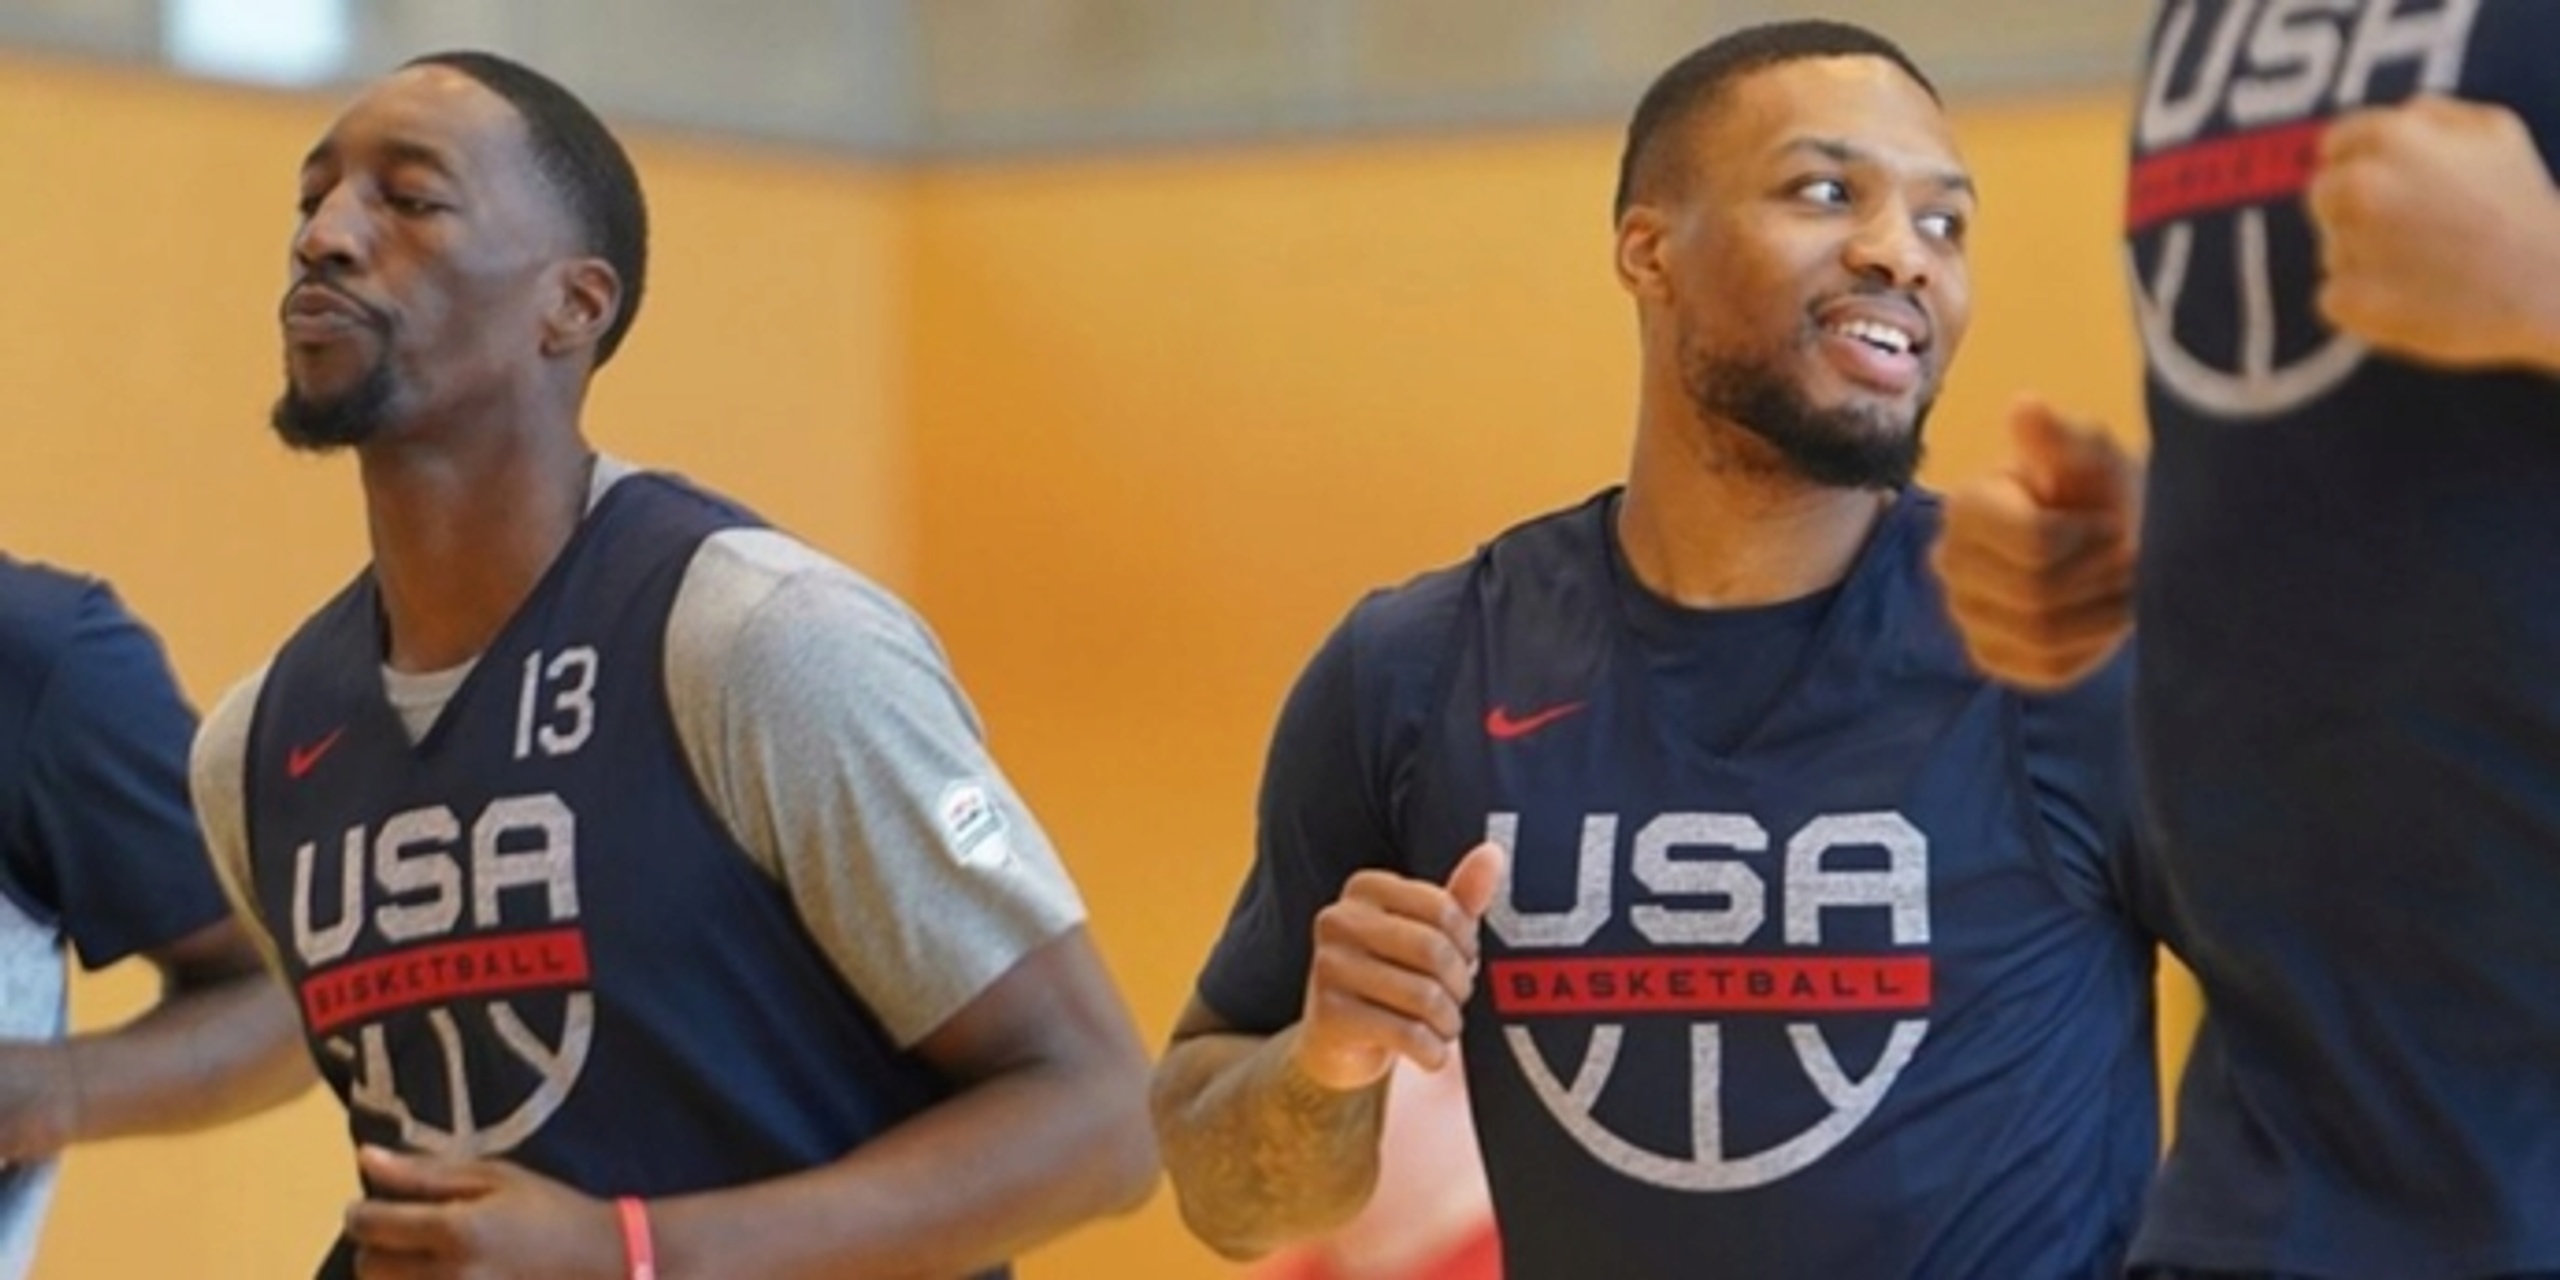 Team USA players learning differences between NBA, Olympic hoops